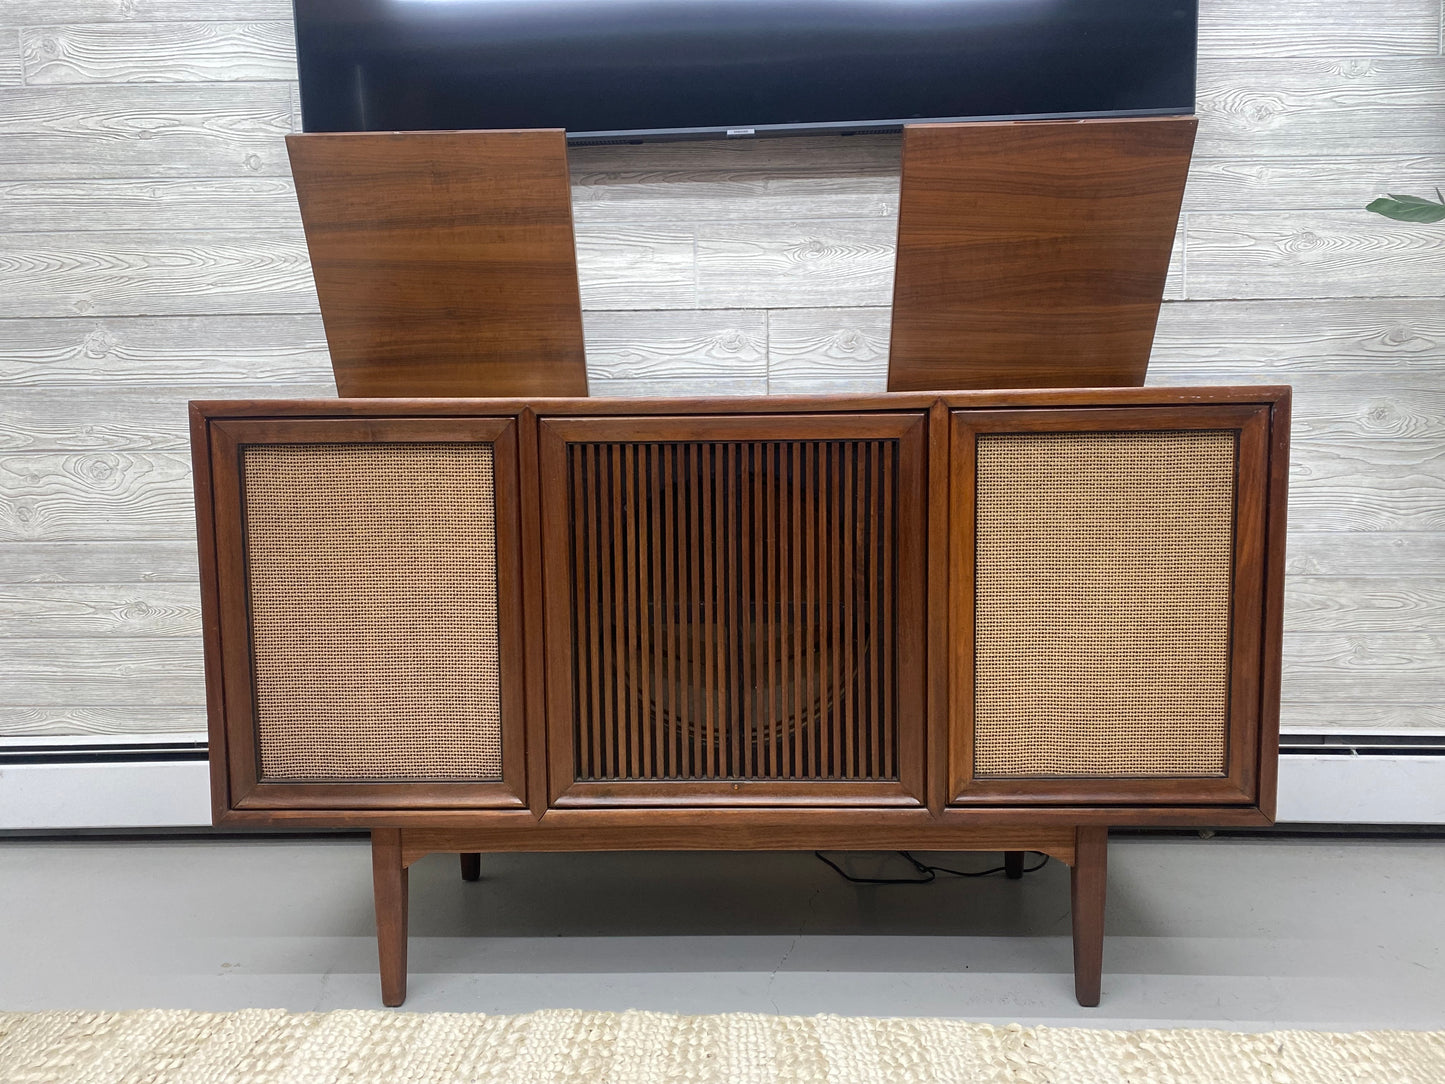 SOLD OUT!!! Motorola Three Channel Cabinet by Drexel The Vintedge Co.